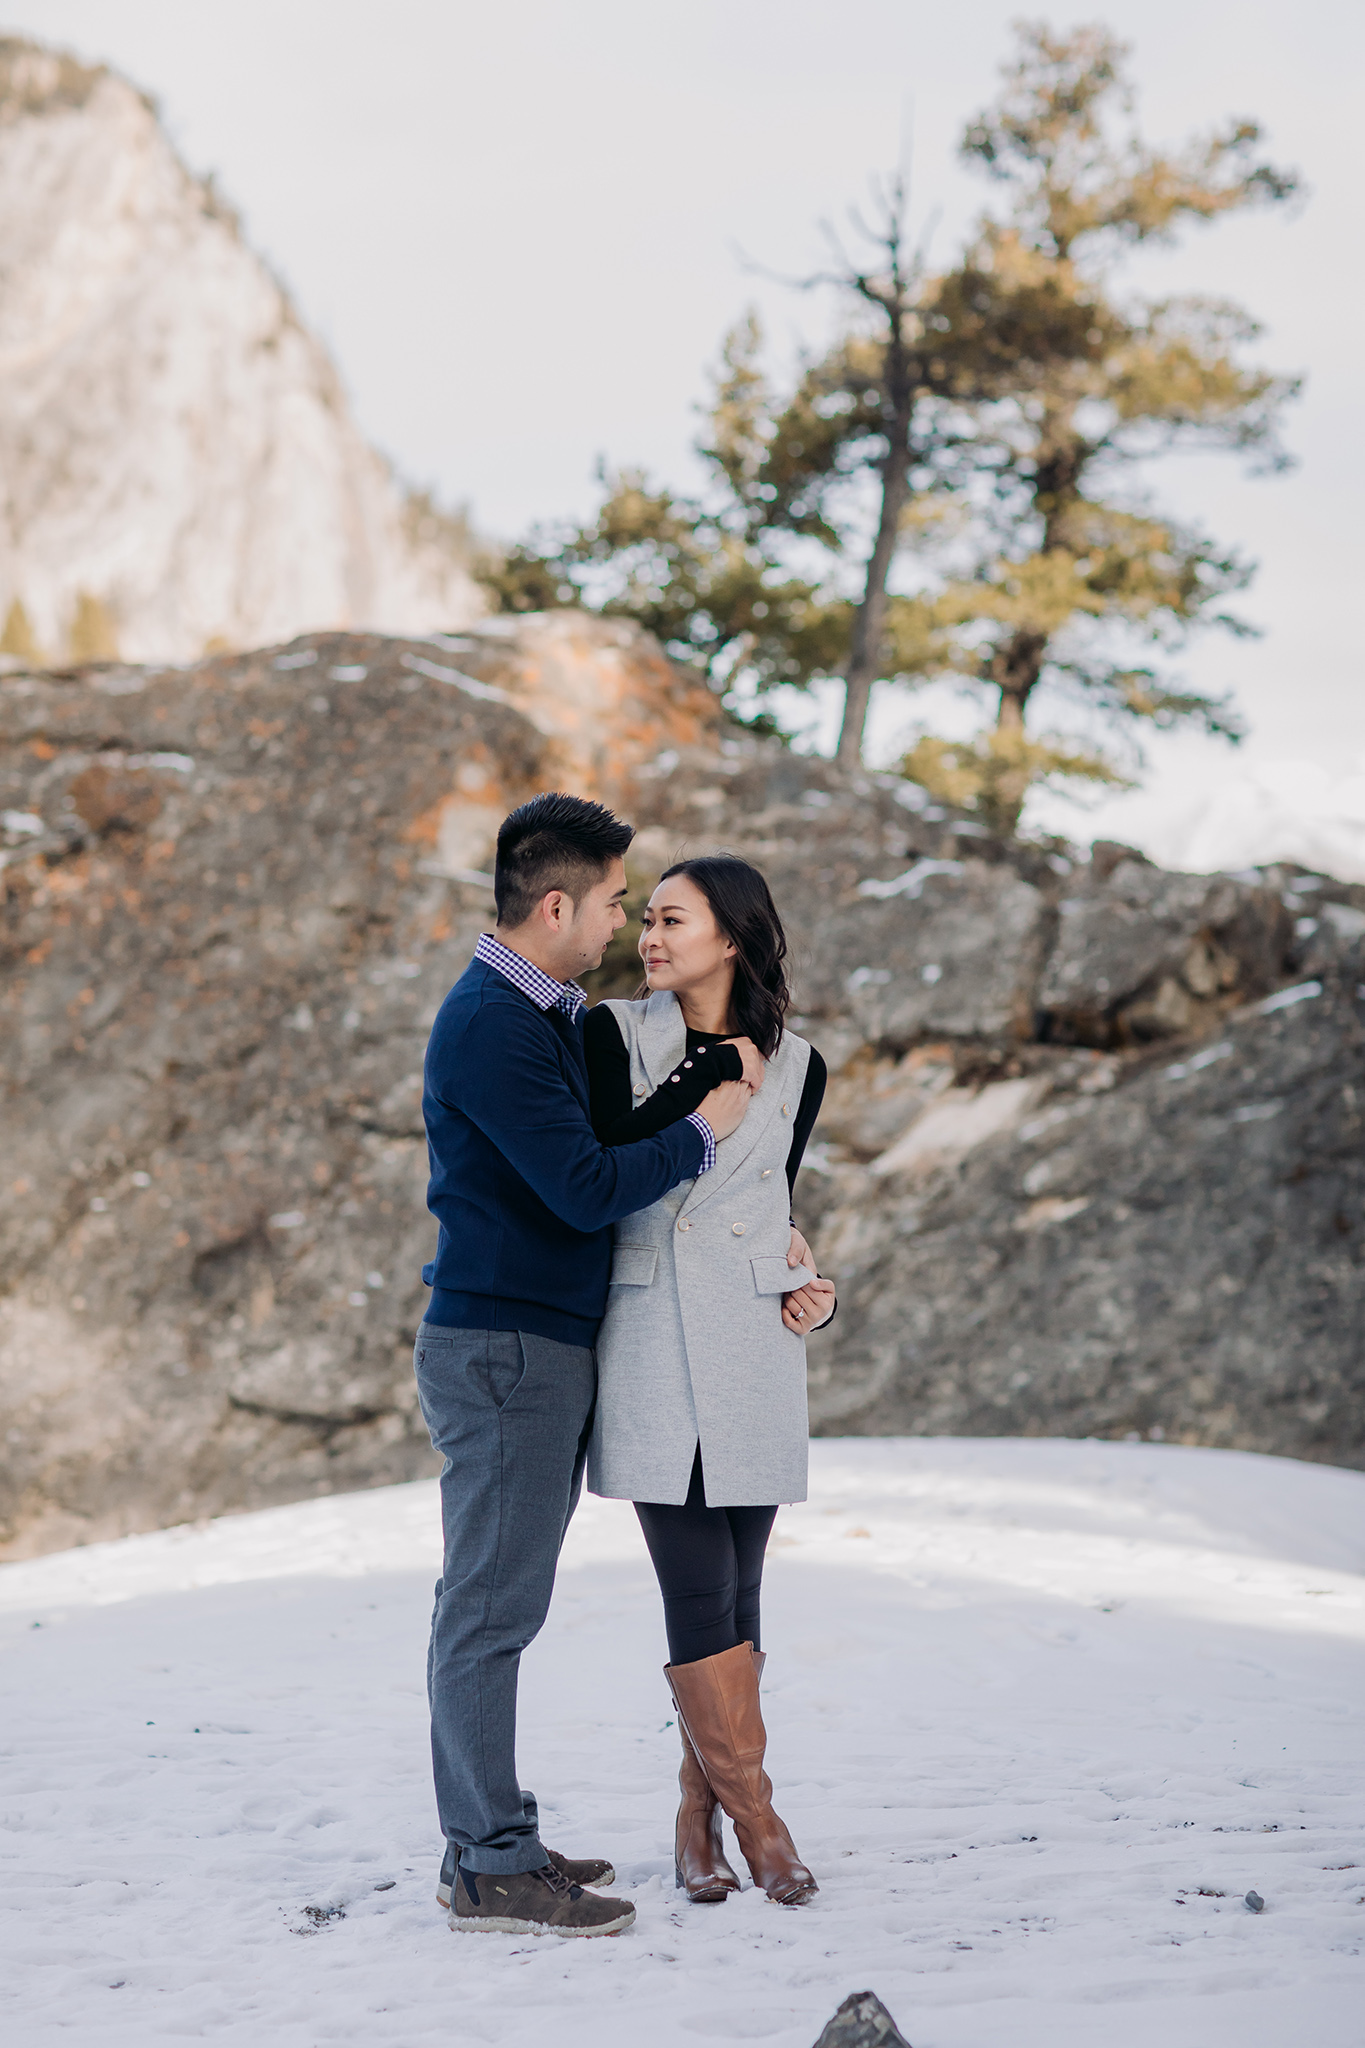 Banff National Park early winter November engagement session on a windy day at Bow Falls